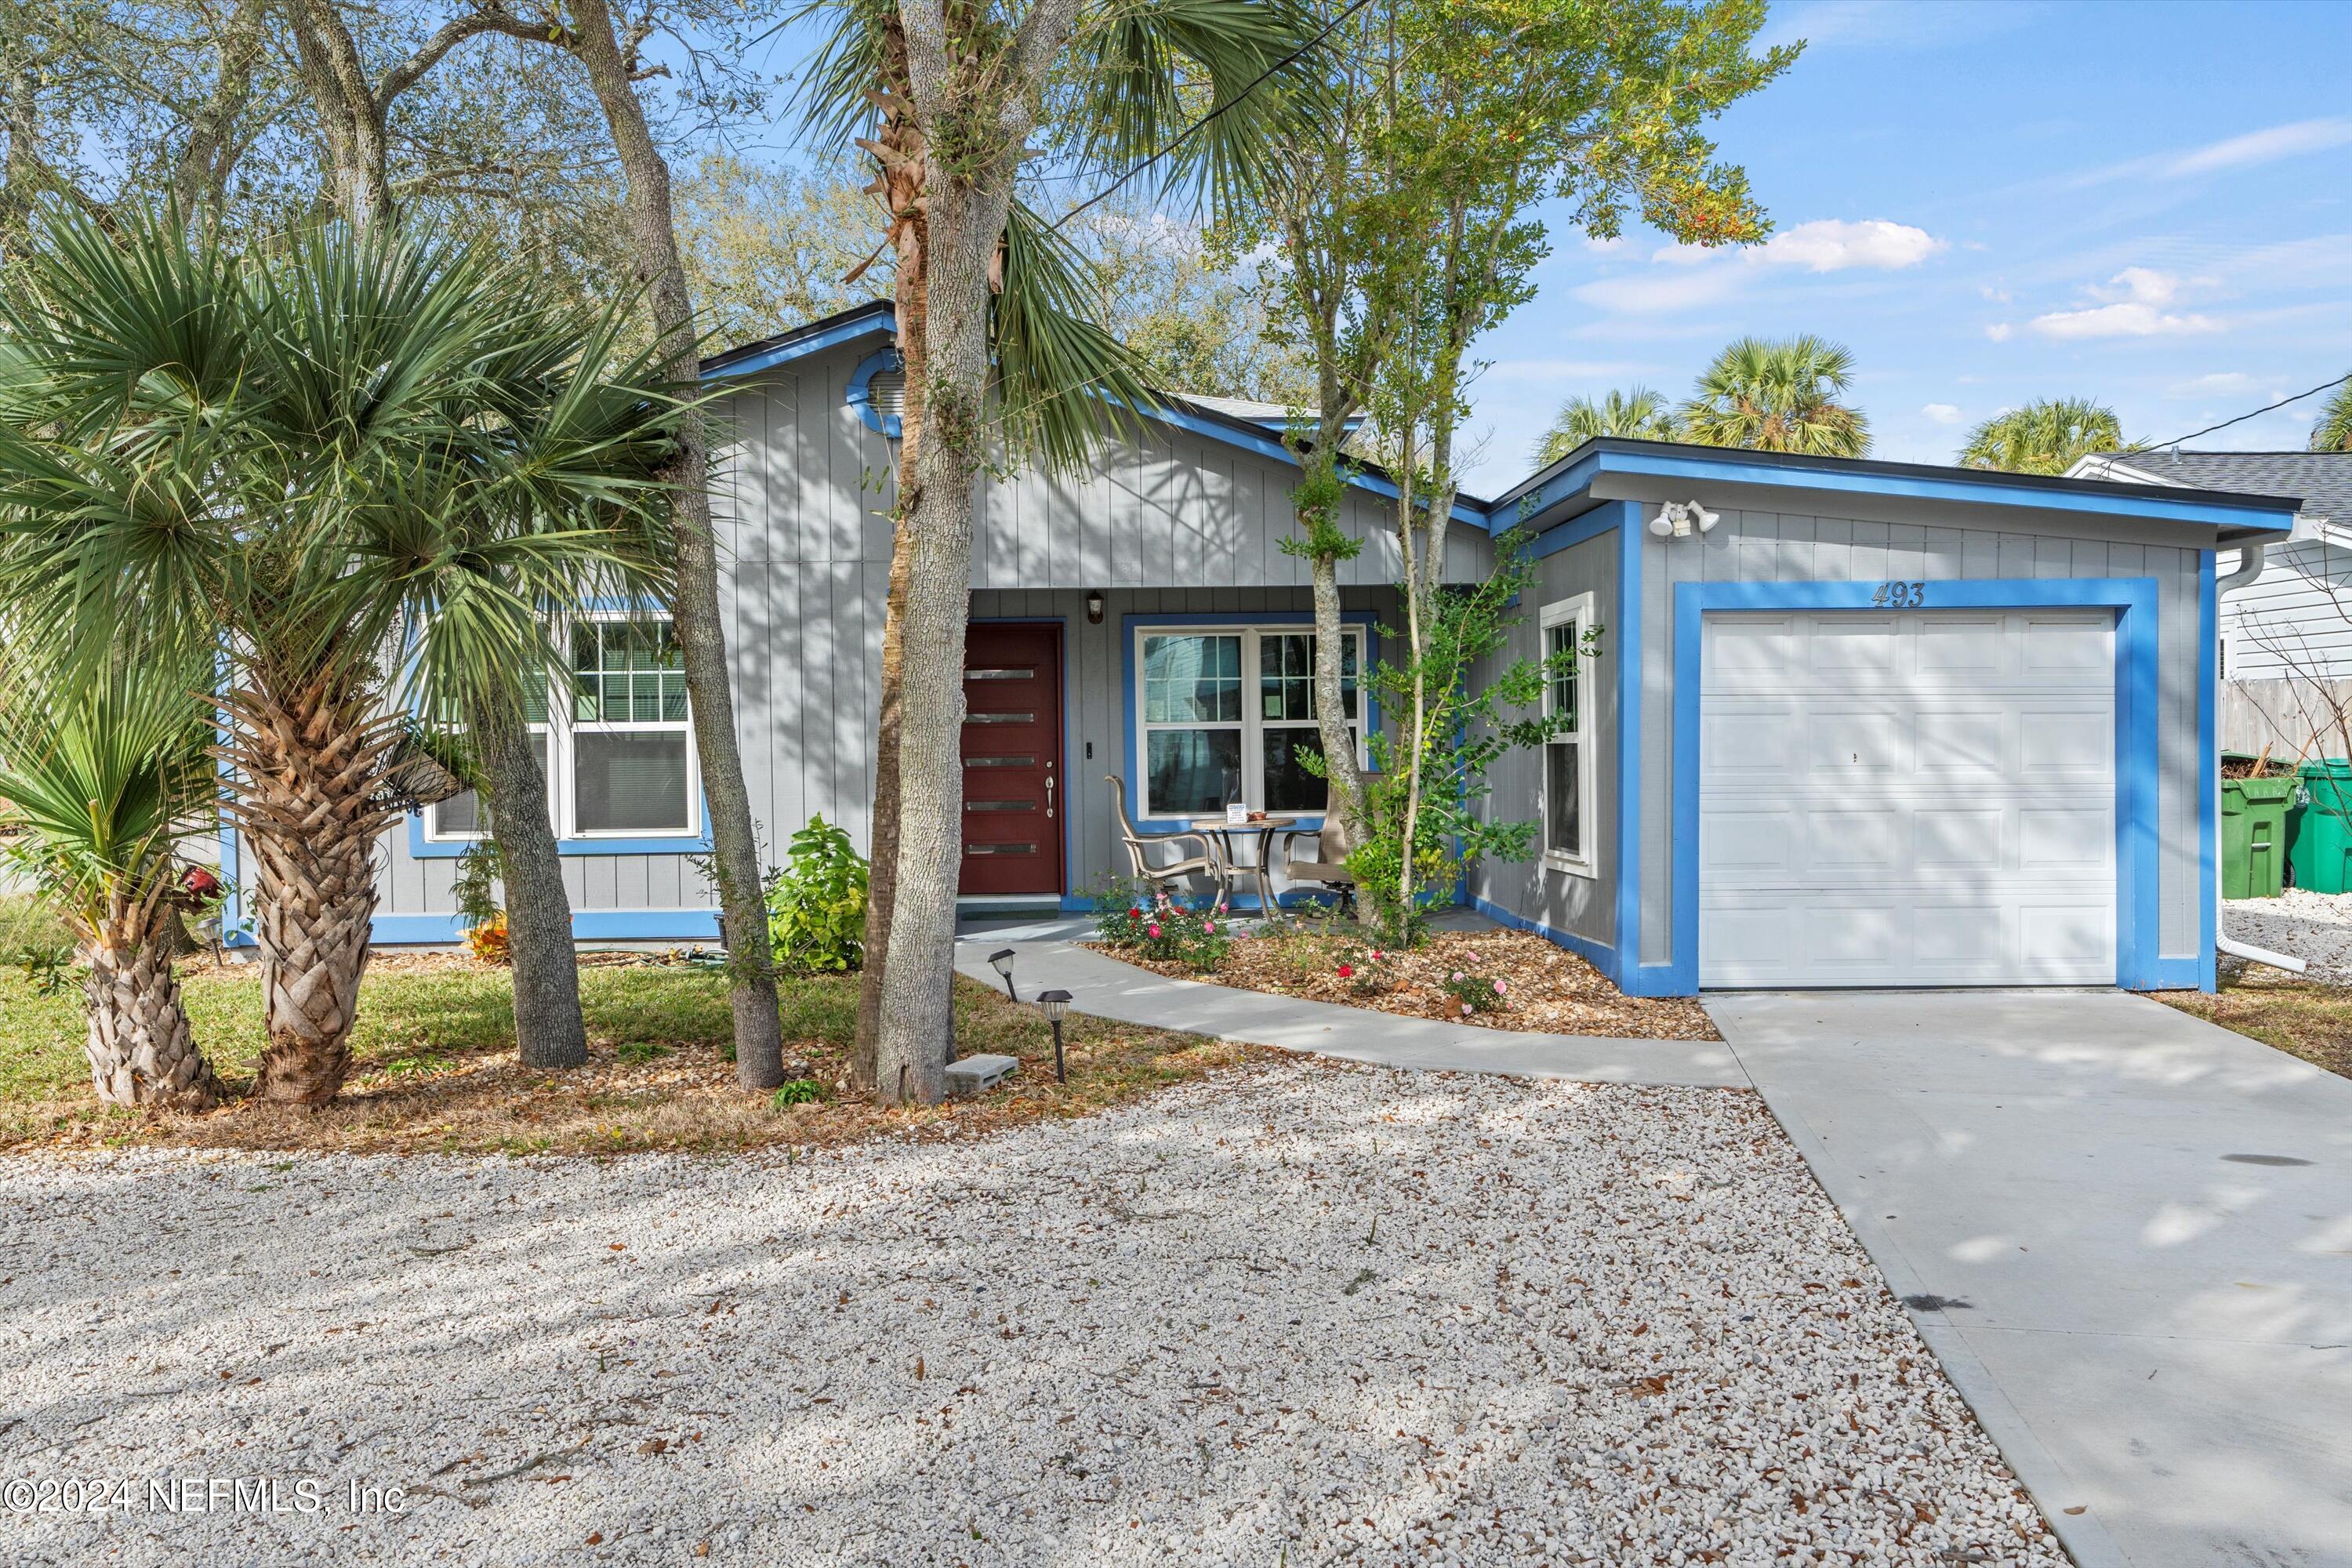 Jacksonville Beach, FL home for sale located at 493 6TH Avenue S, Jacksonville Beach, FL 32250